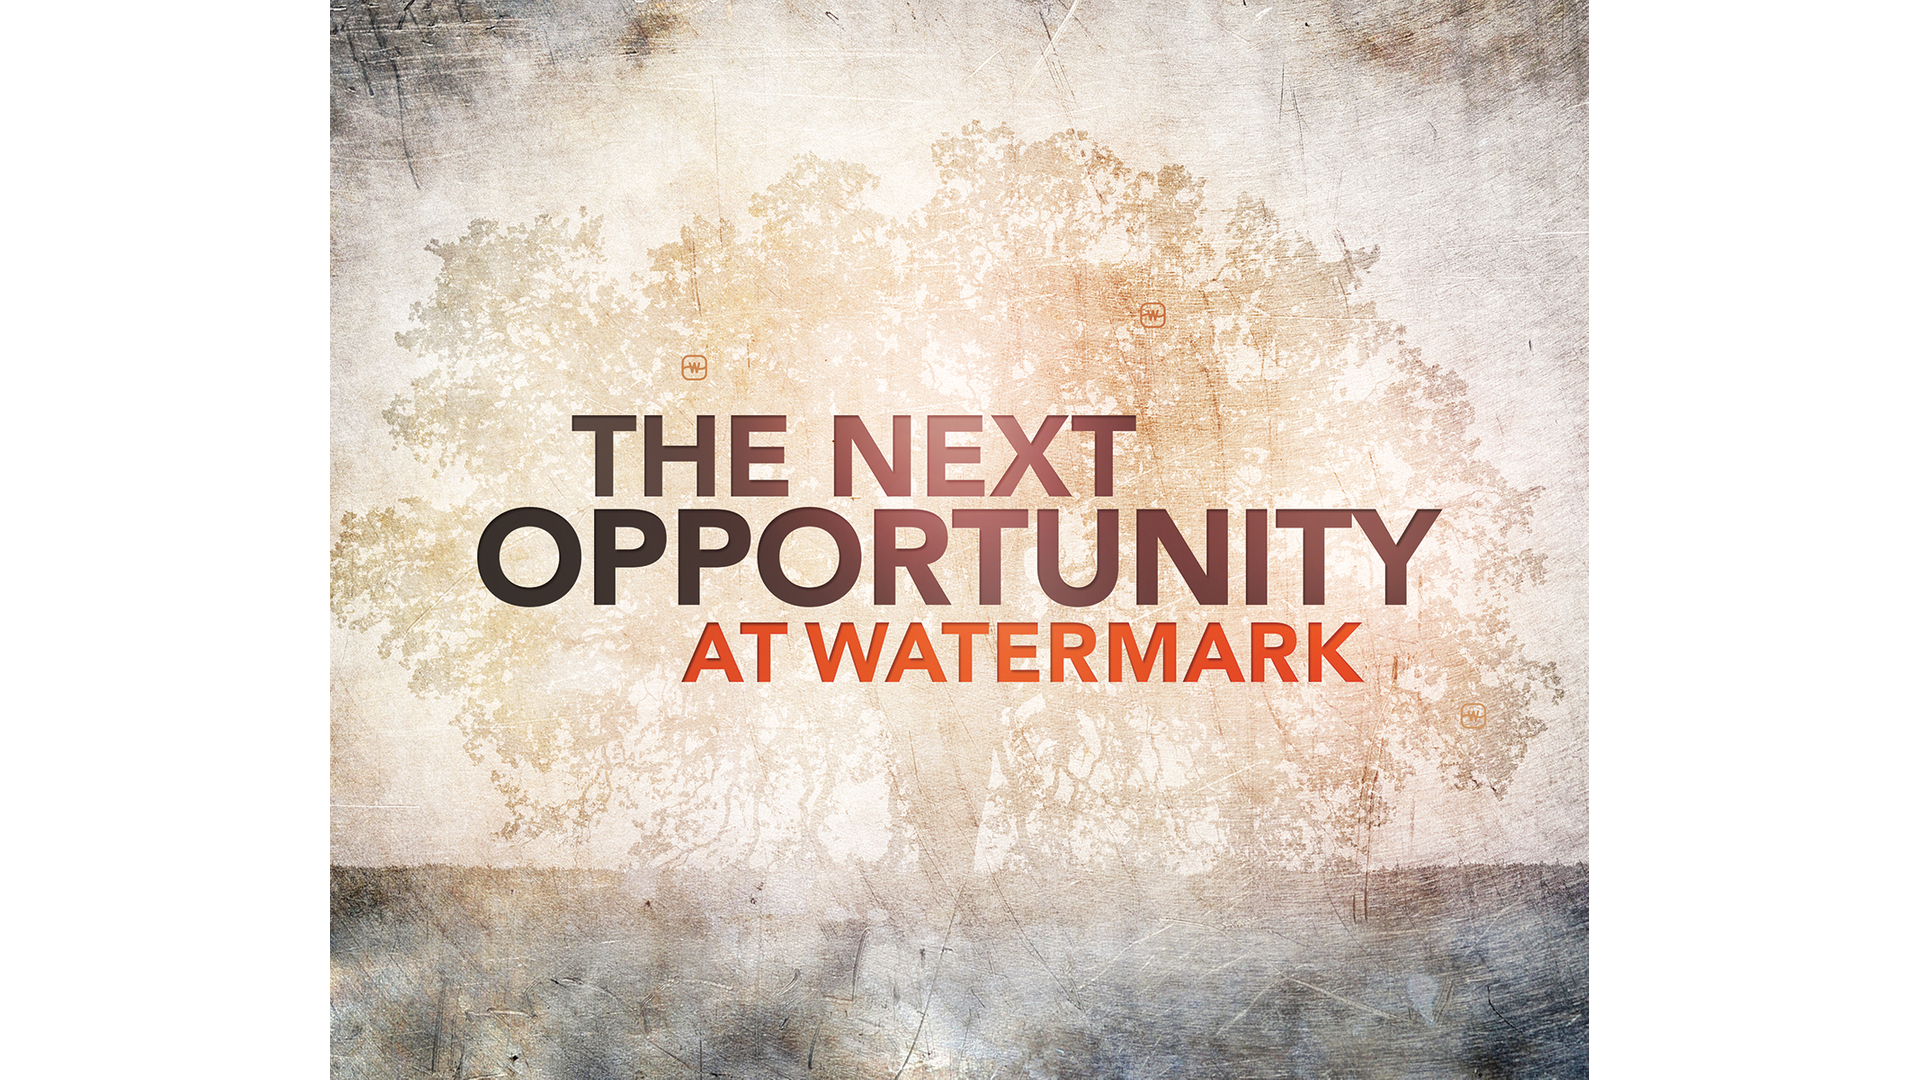 A Special Message From Todd Wagner Regarding Watermark’s Plano Expansion Plans Hero Image